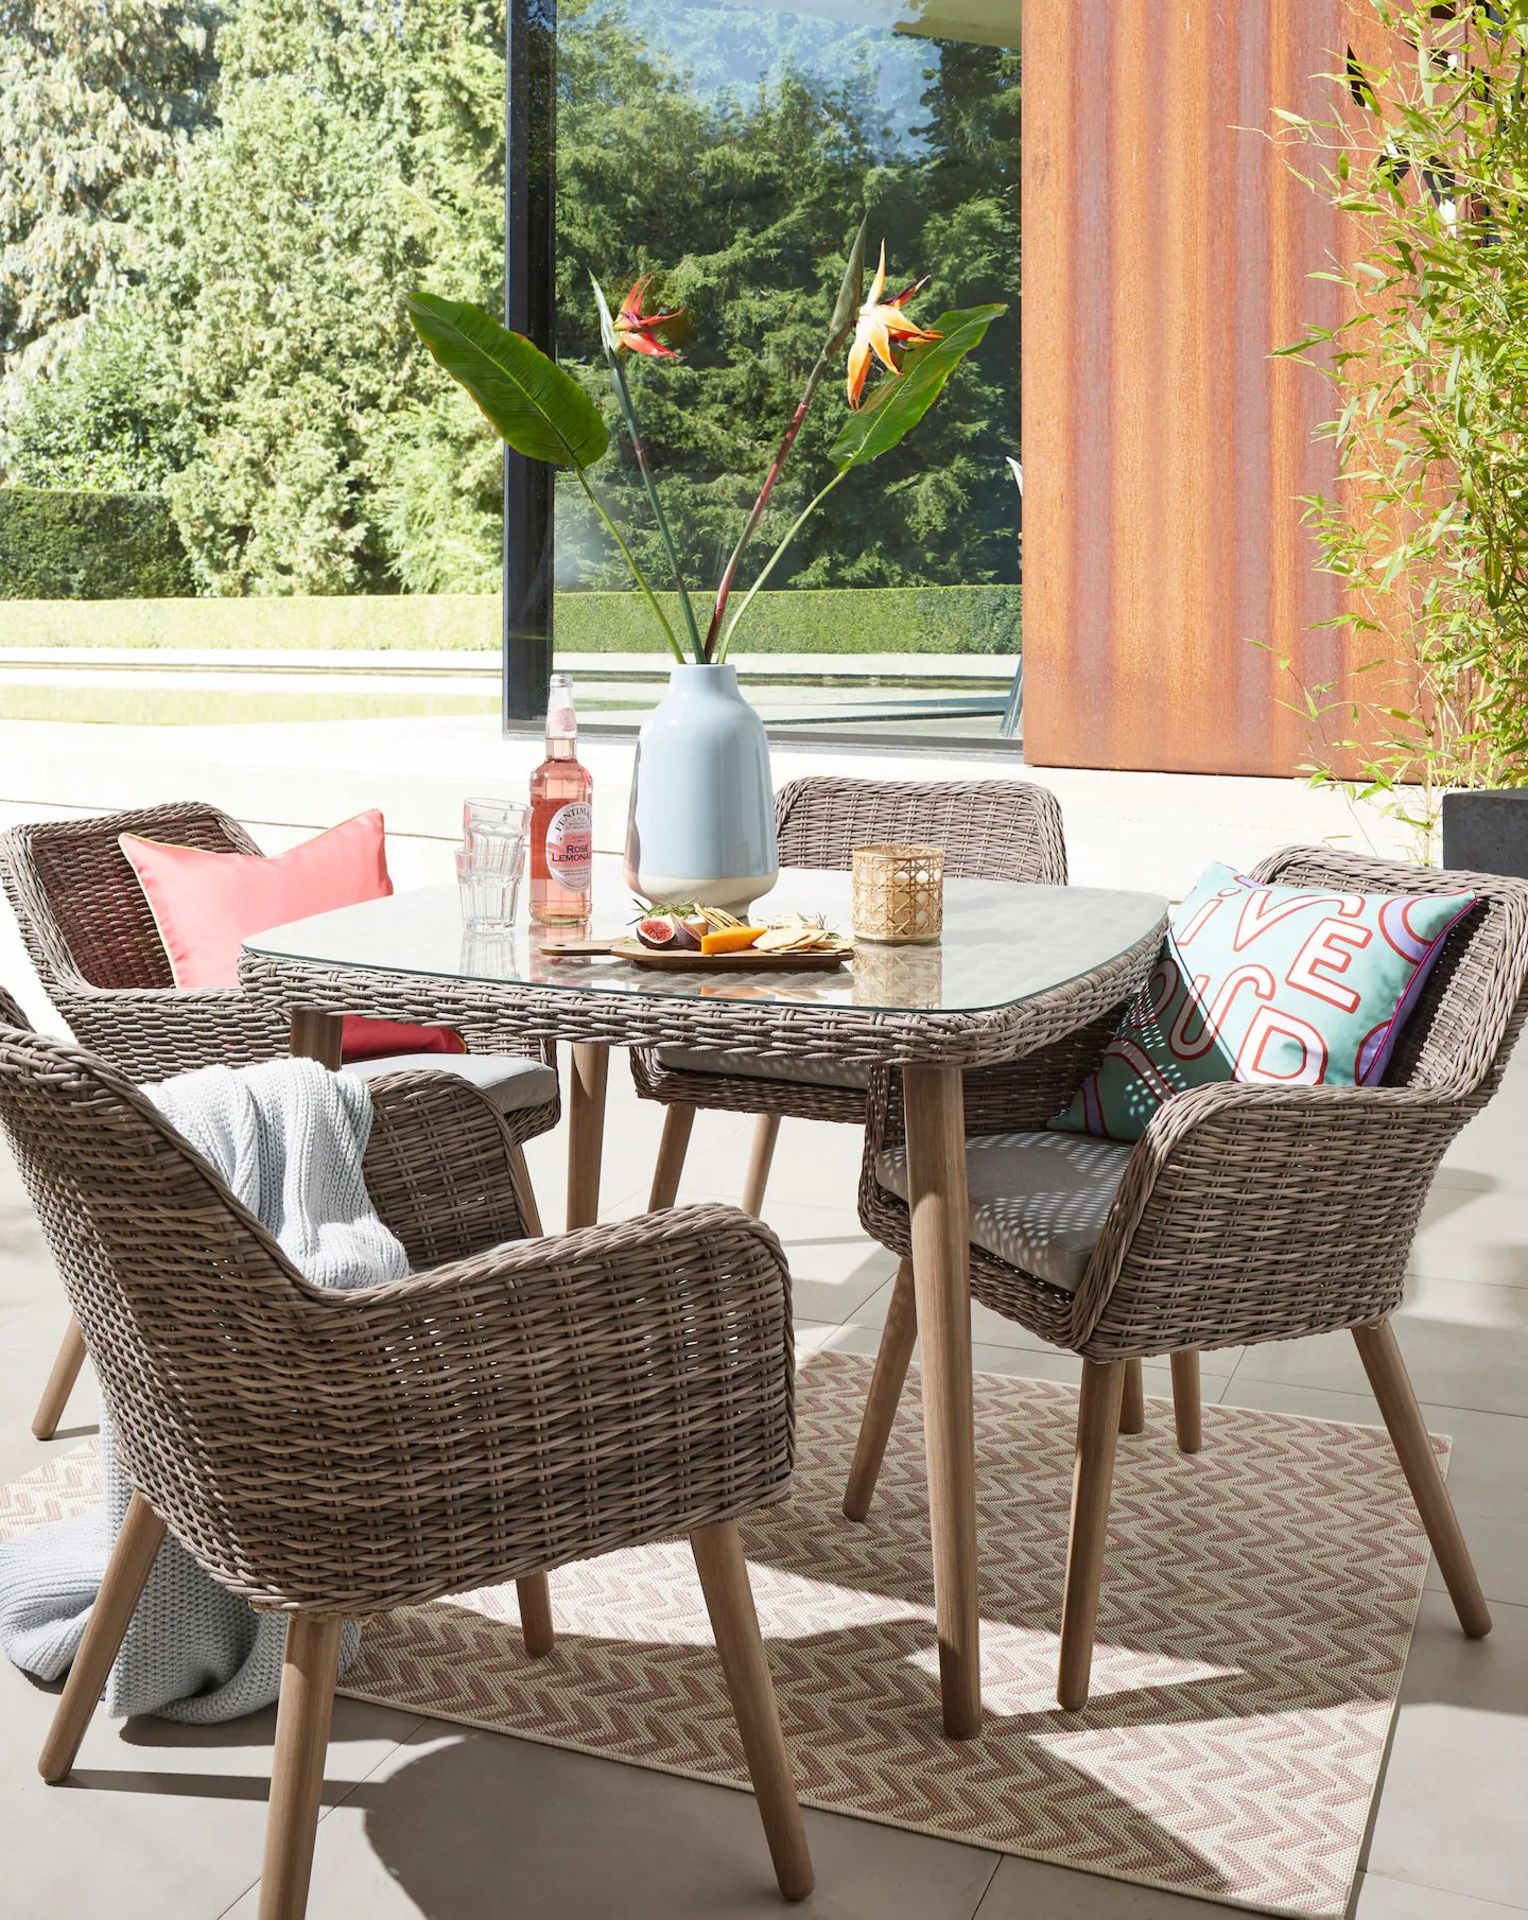 TRADE PALLET TO CONTAIN 3x BRAND NEW Maldives 4 Seater Dining Set BLACK/NATURAL. RRP £879 EACH. This